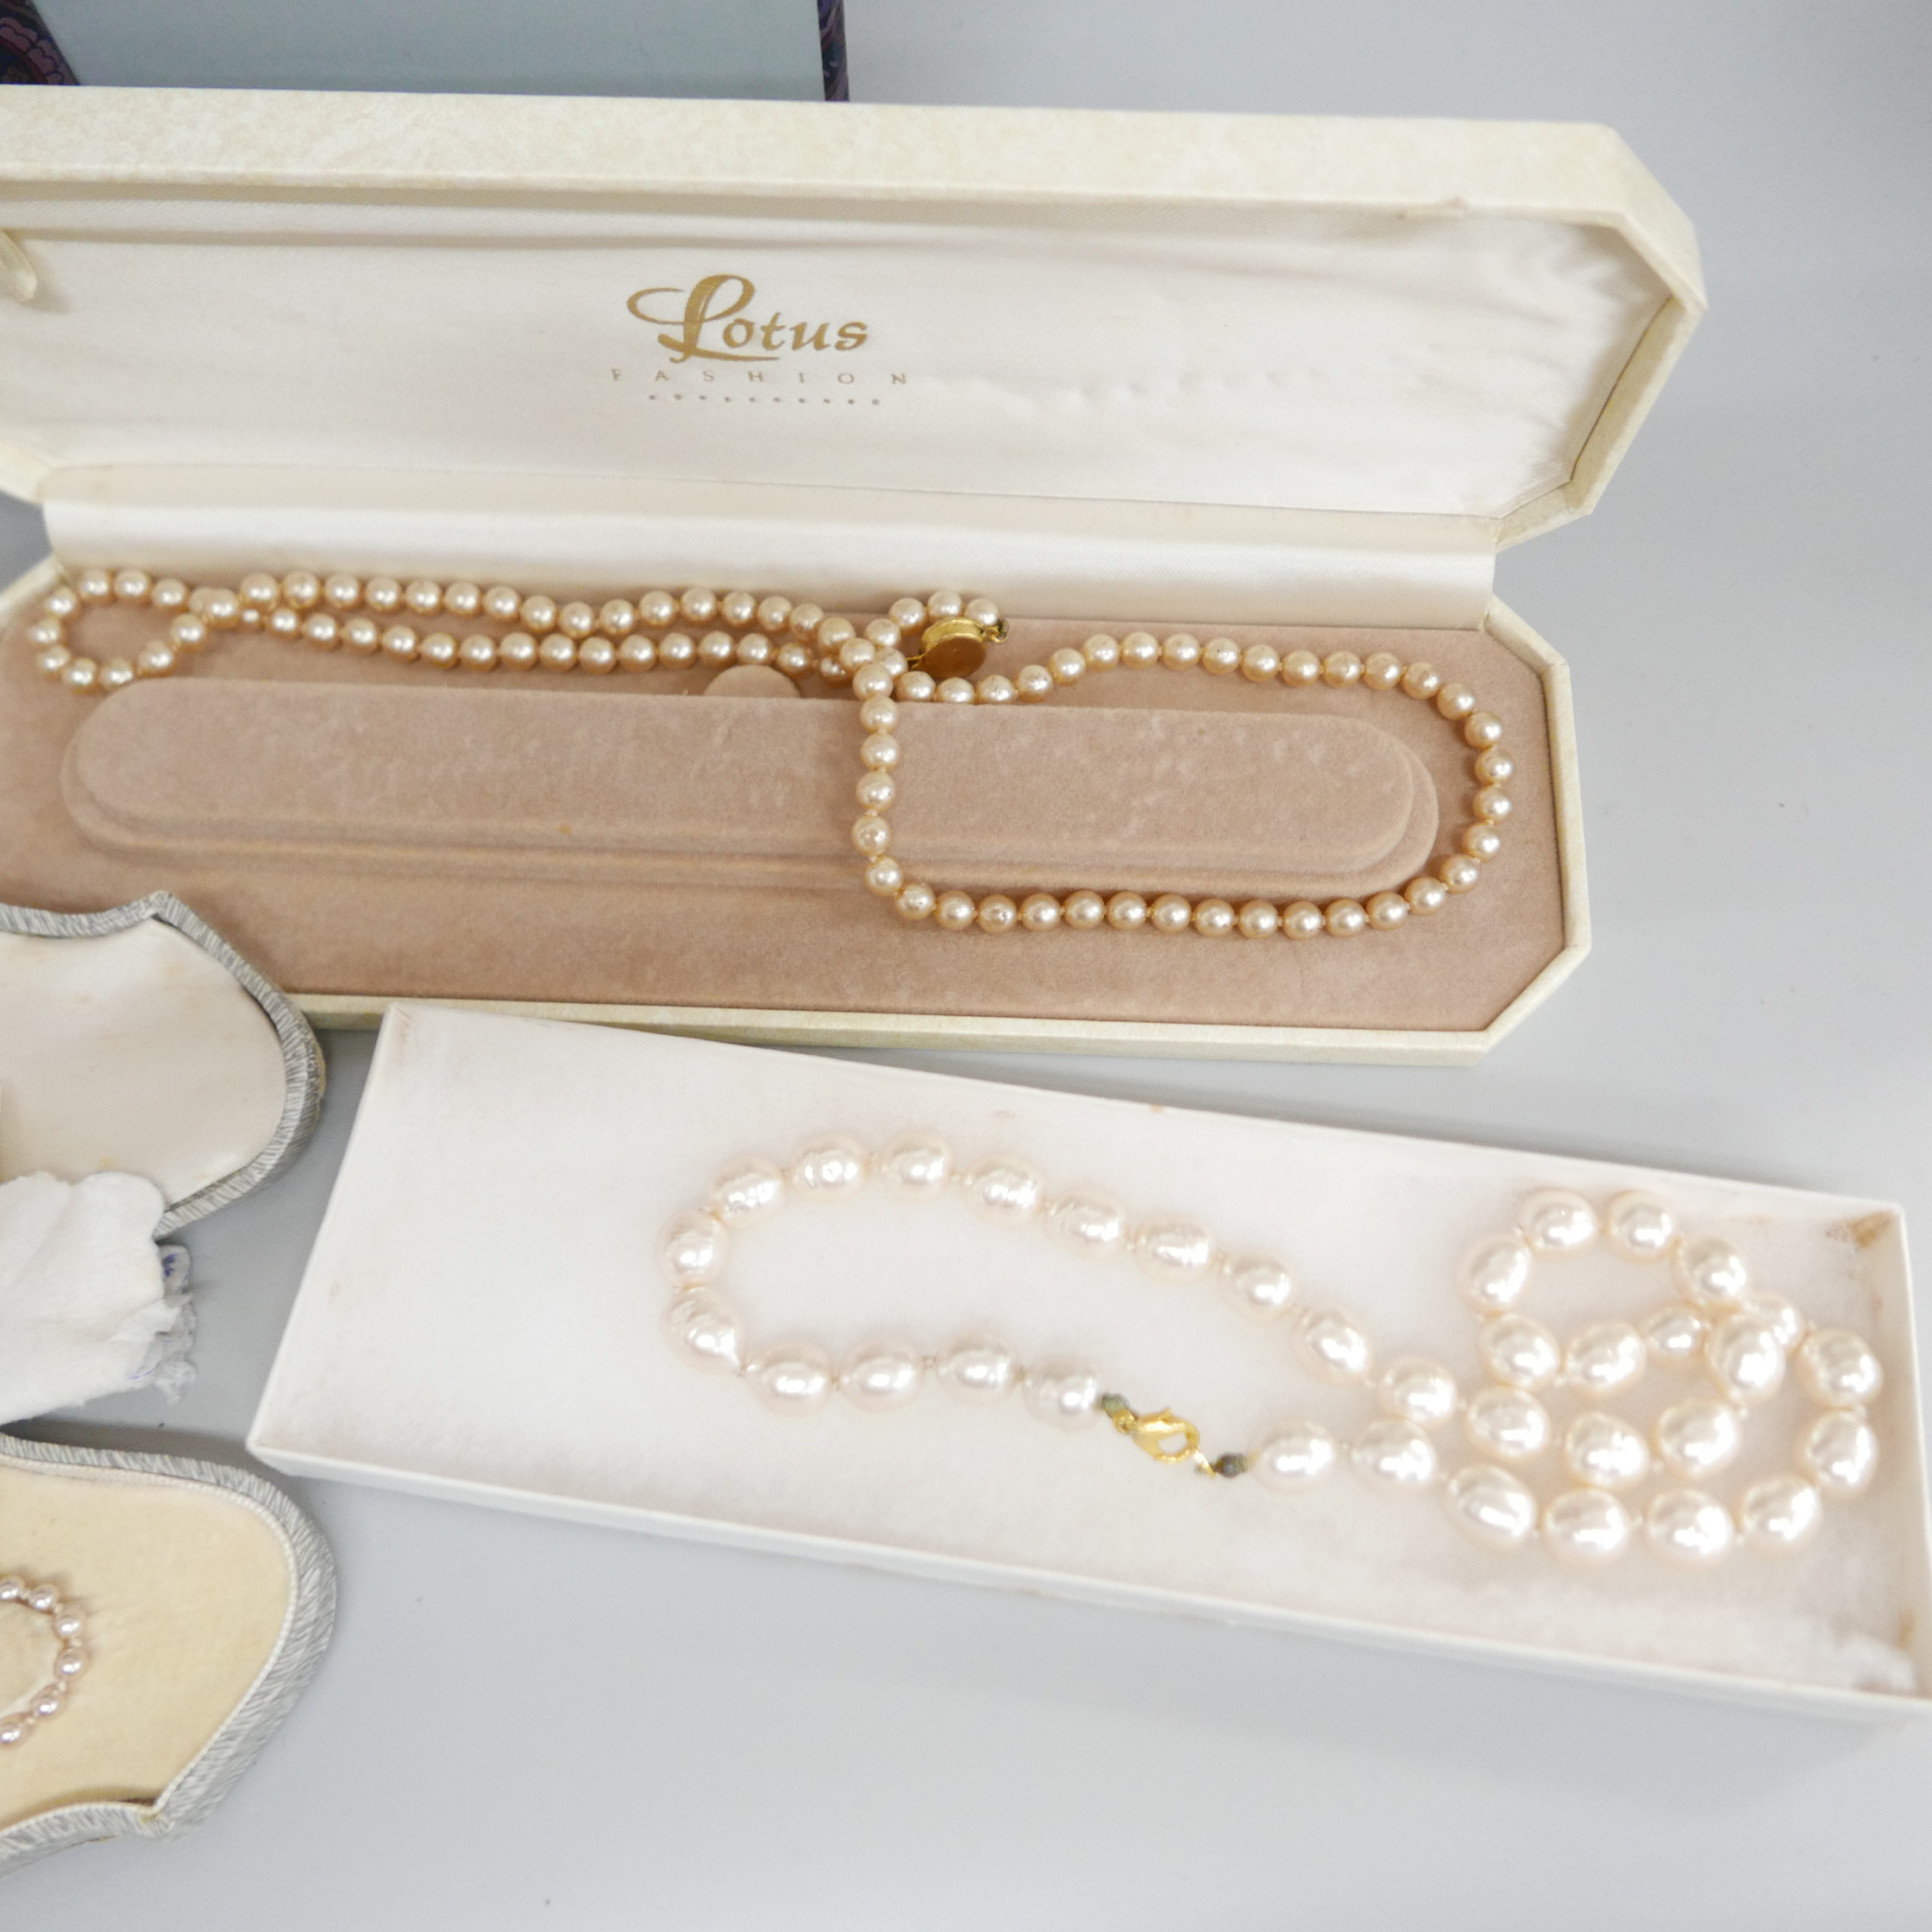 Boxed pearls including Lotus and silver mounted - Image 4 of 6